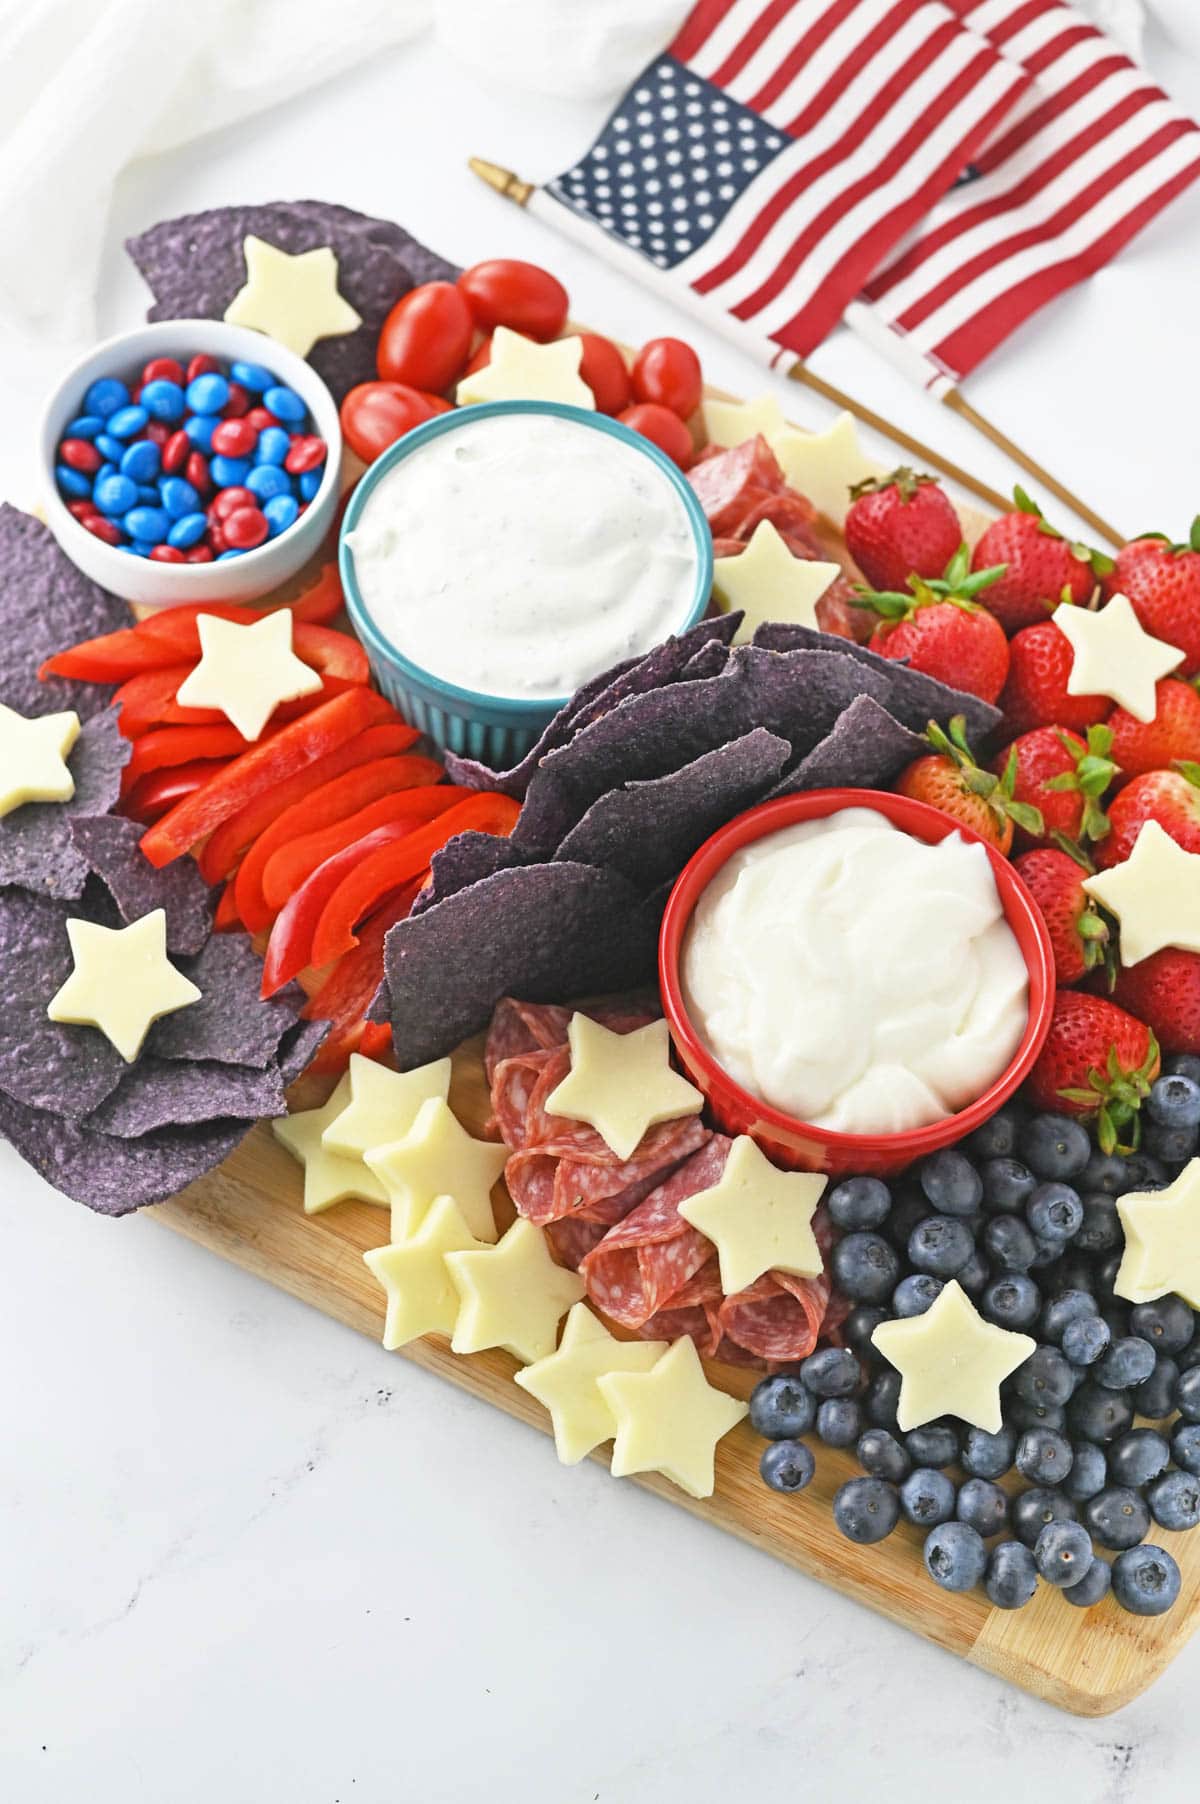 Fourth of July Charcuterie Bard with American flags